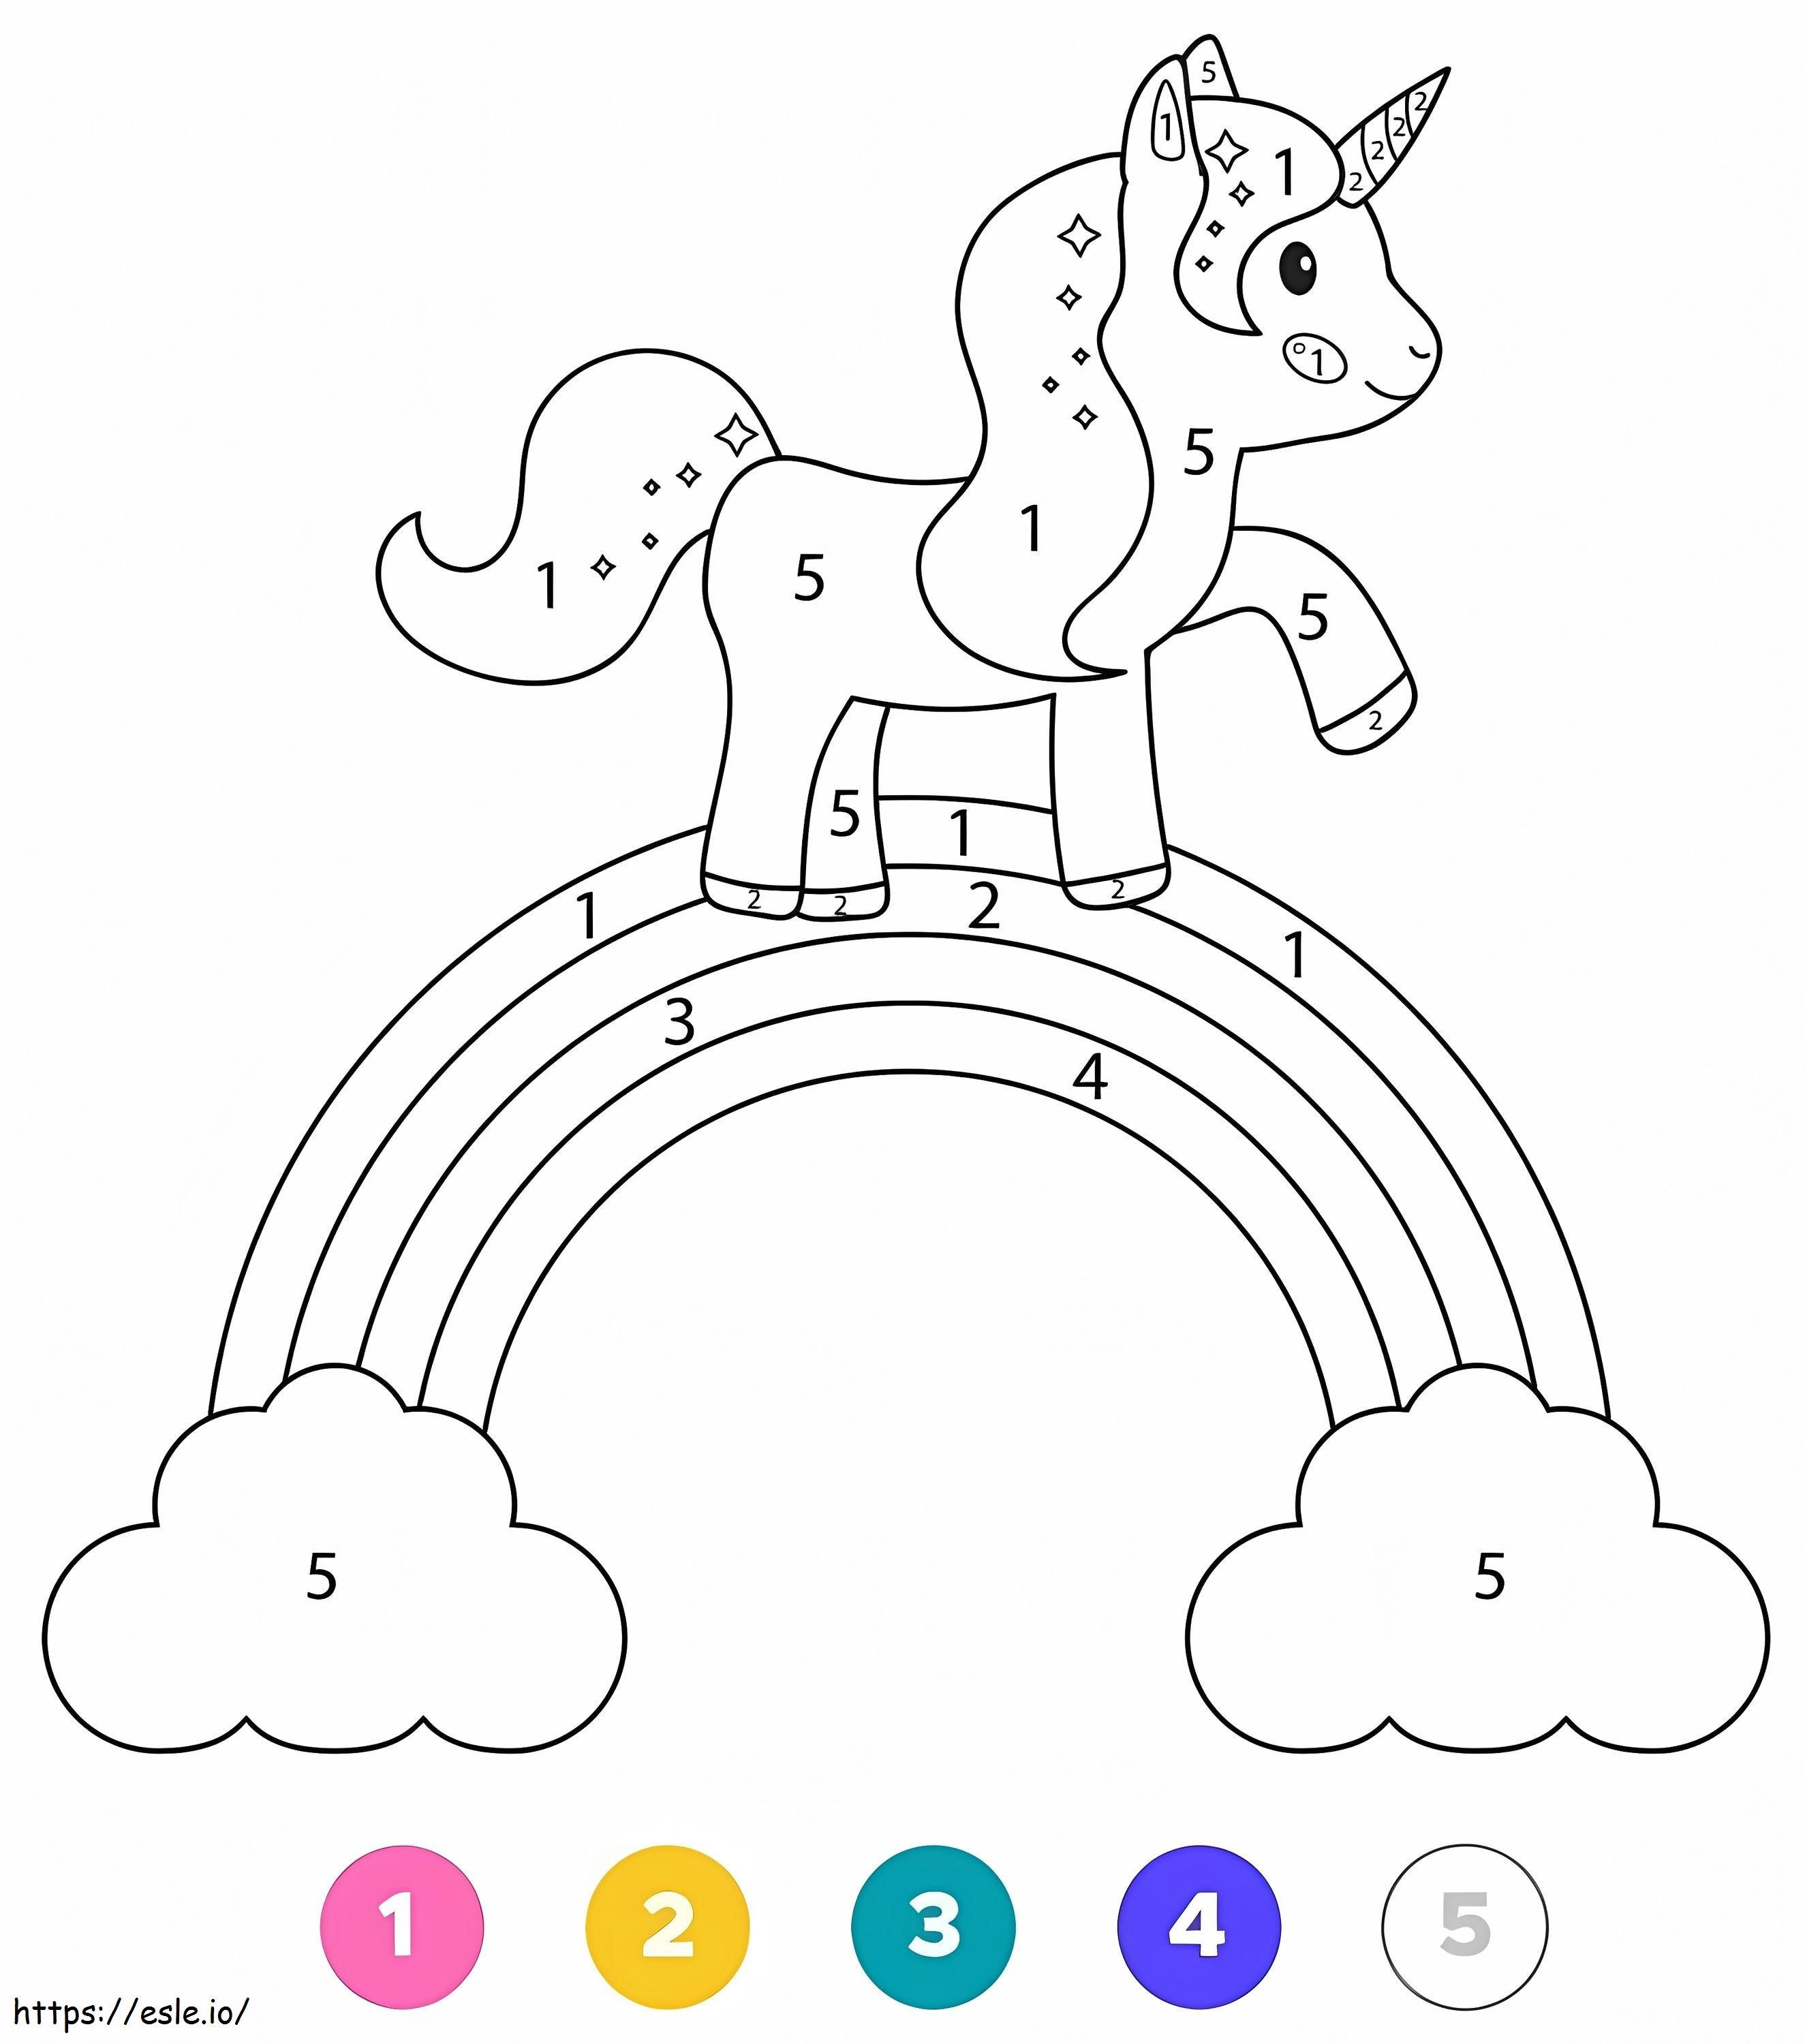 Magical Unicorn 8 coloring page